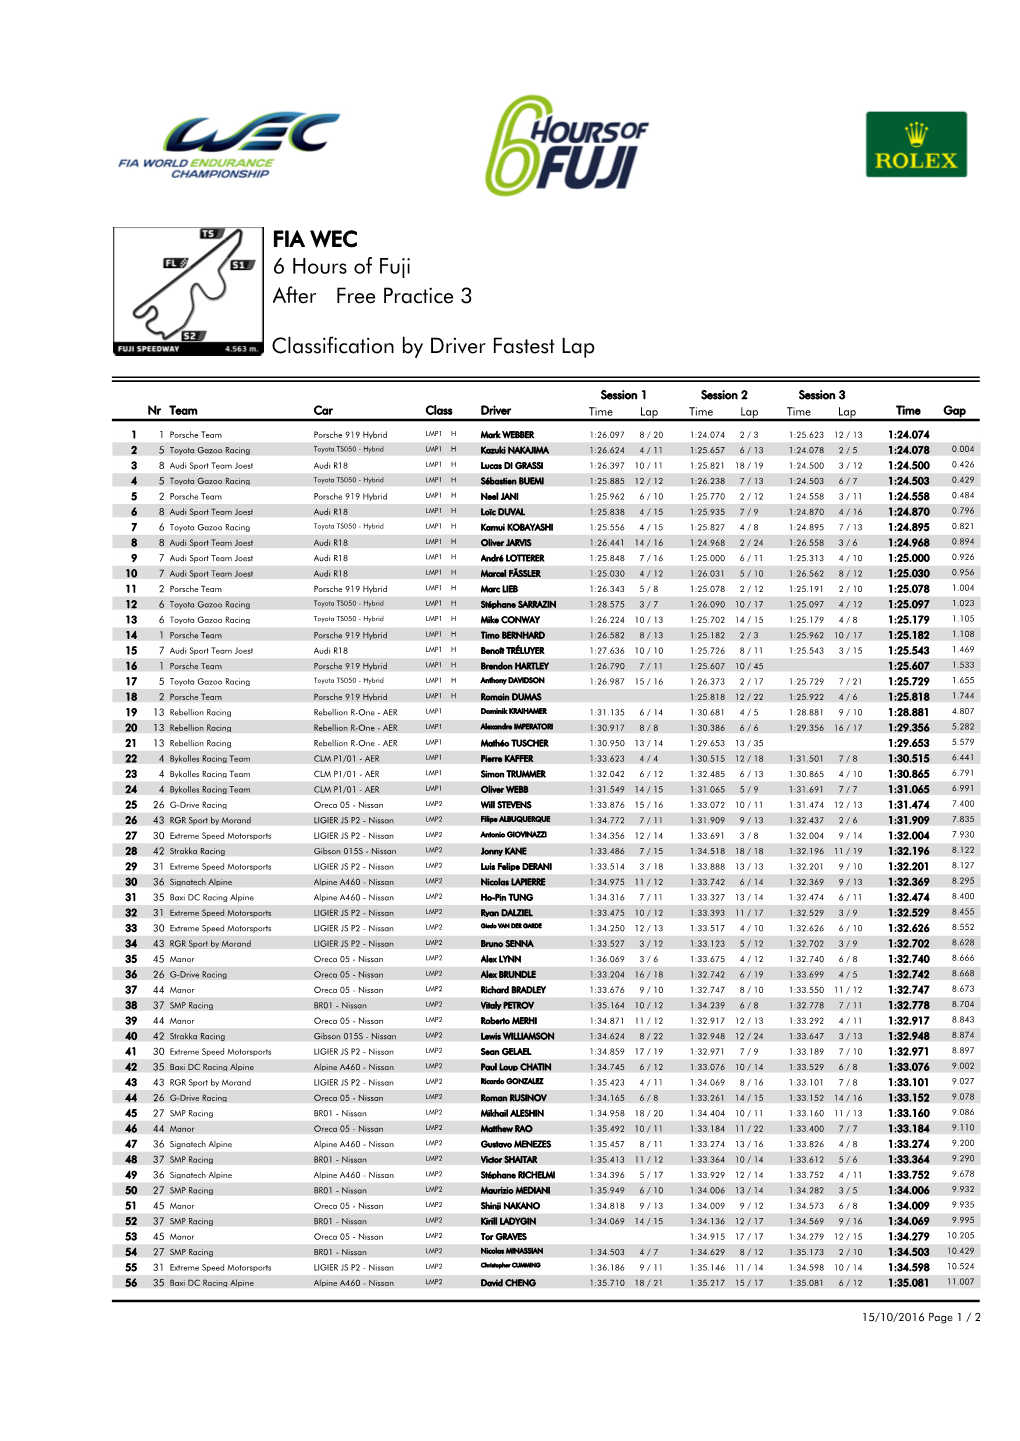 Free Practice 3 6 Hours of Fuji FIA WEC After Classification by Driver